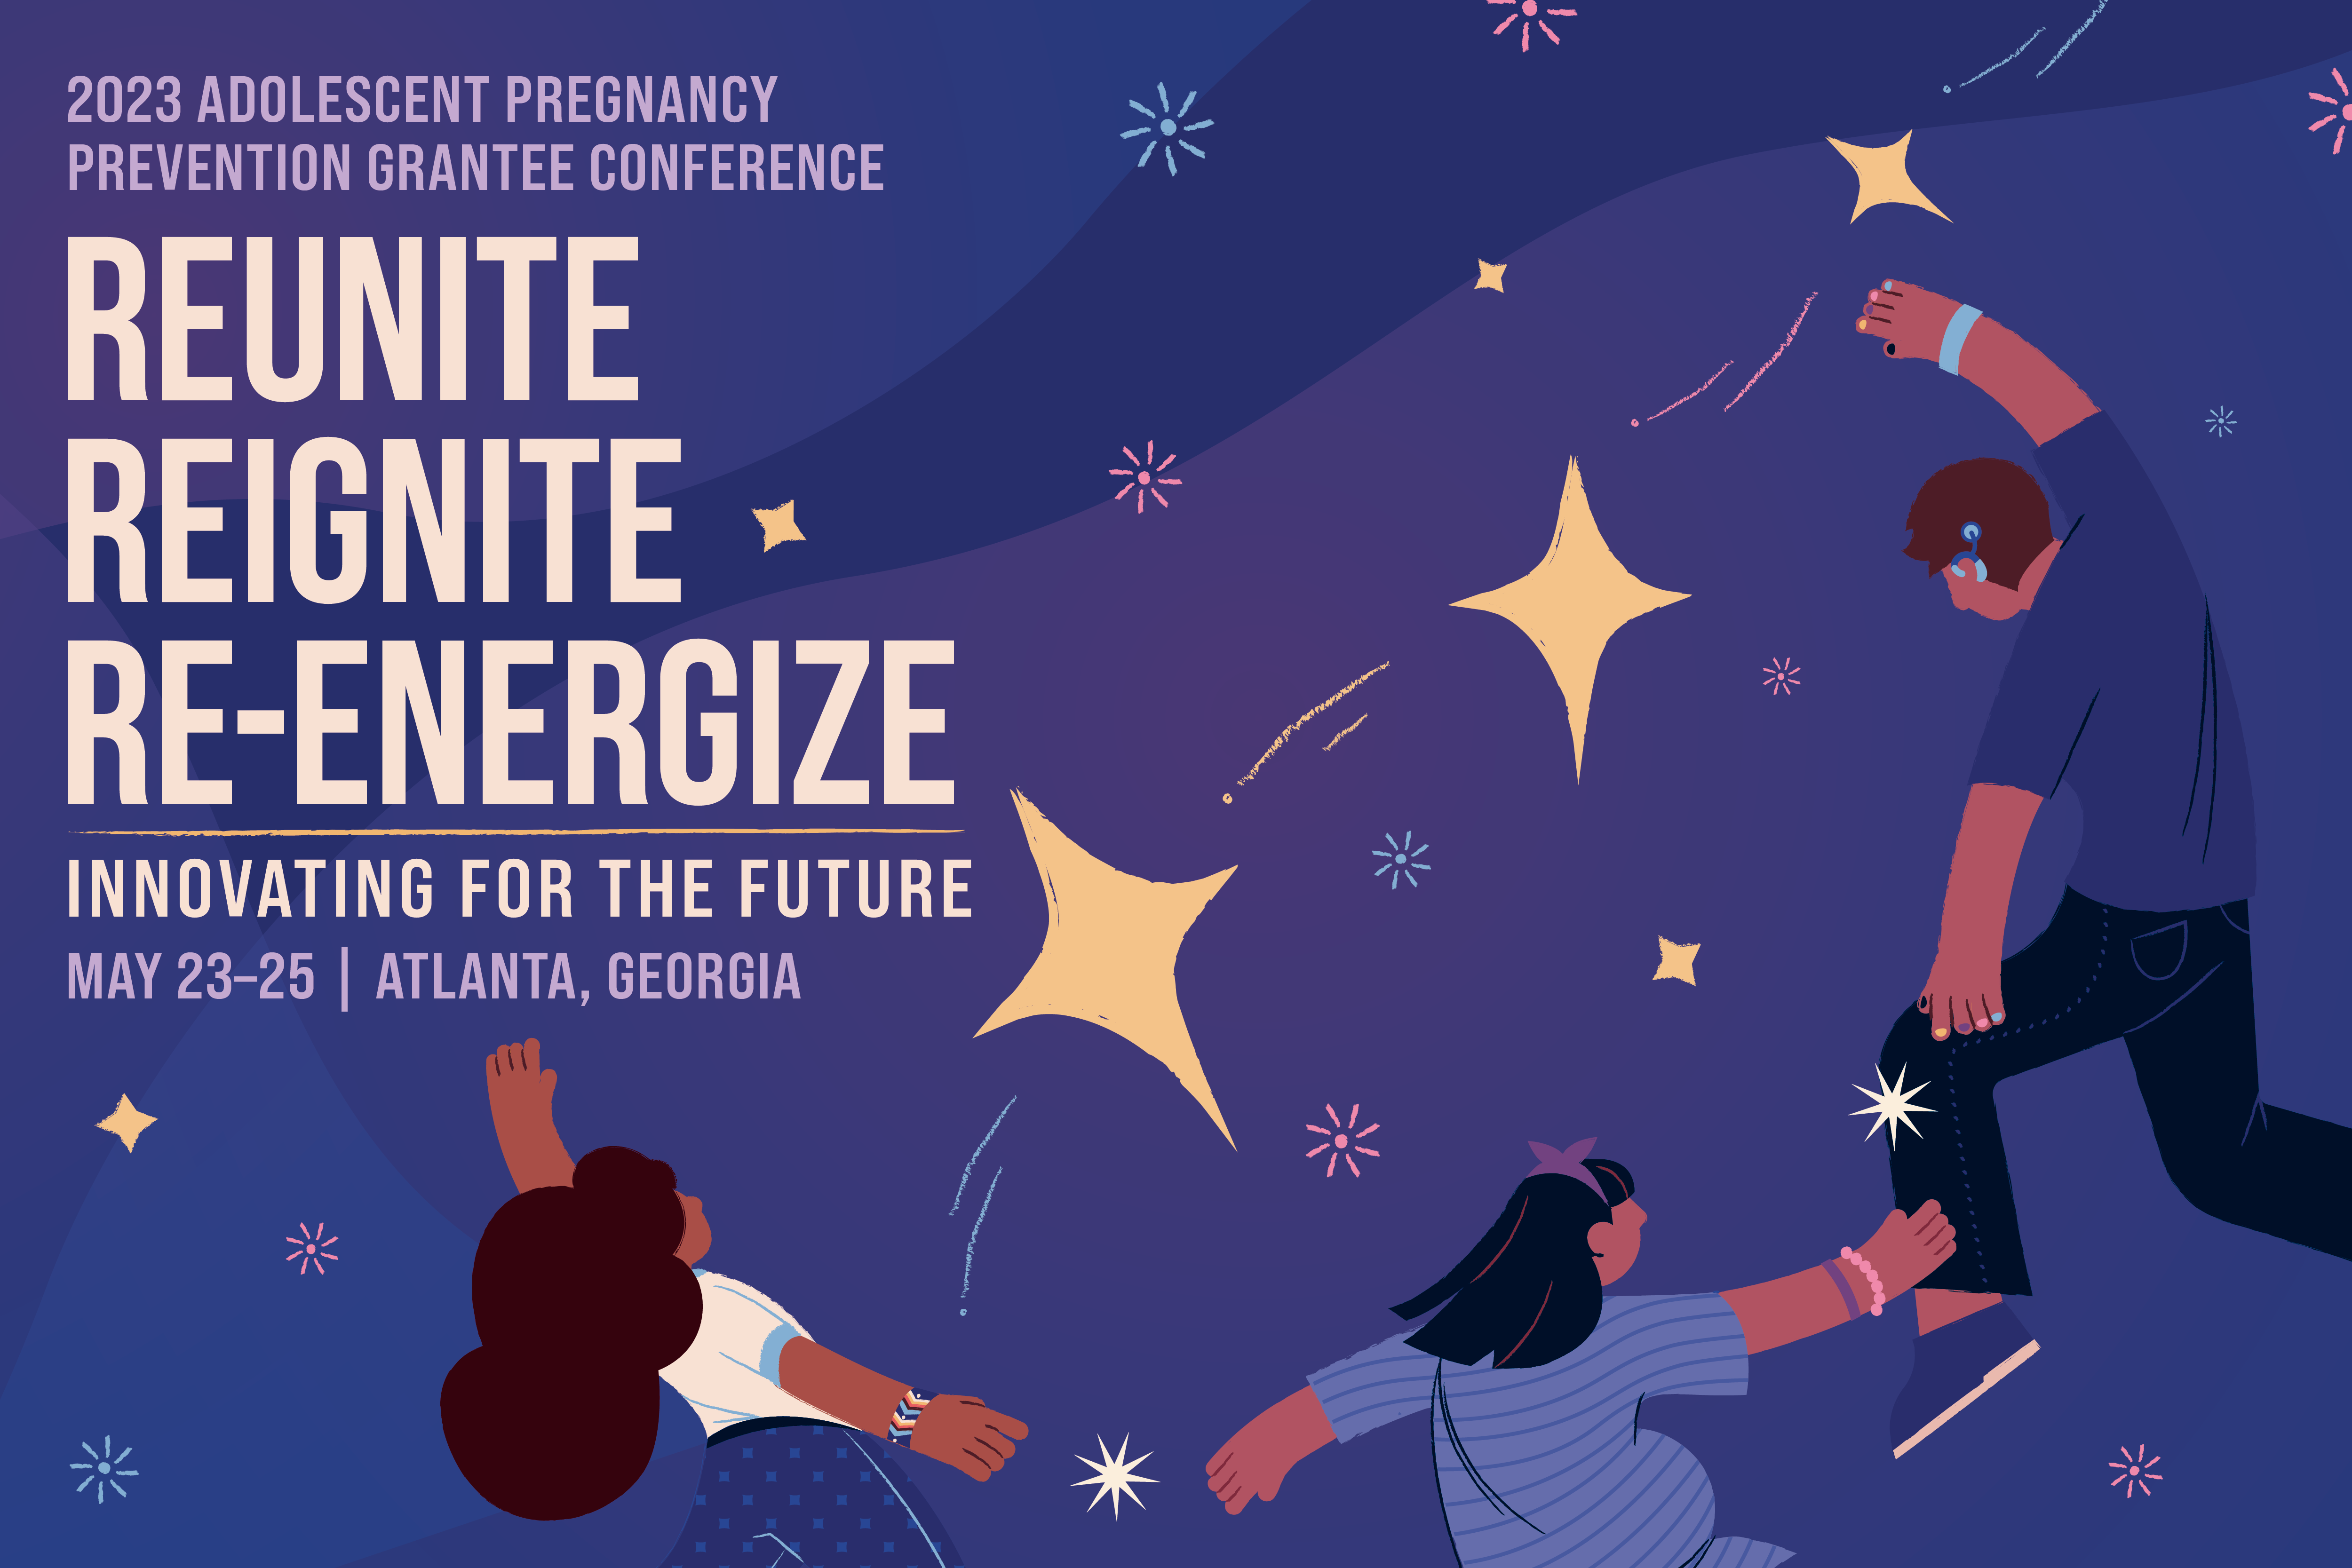 Text reads, "2023 Adolescent Pregnancy Prevention Grantee Conference...Reunite Reignite Re-energize...Innovating for the Future...May 23 to 25 Atlanta Georgia". Three youth are on top of a starry background.